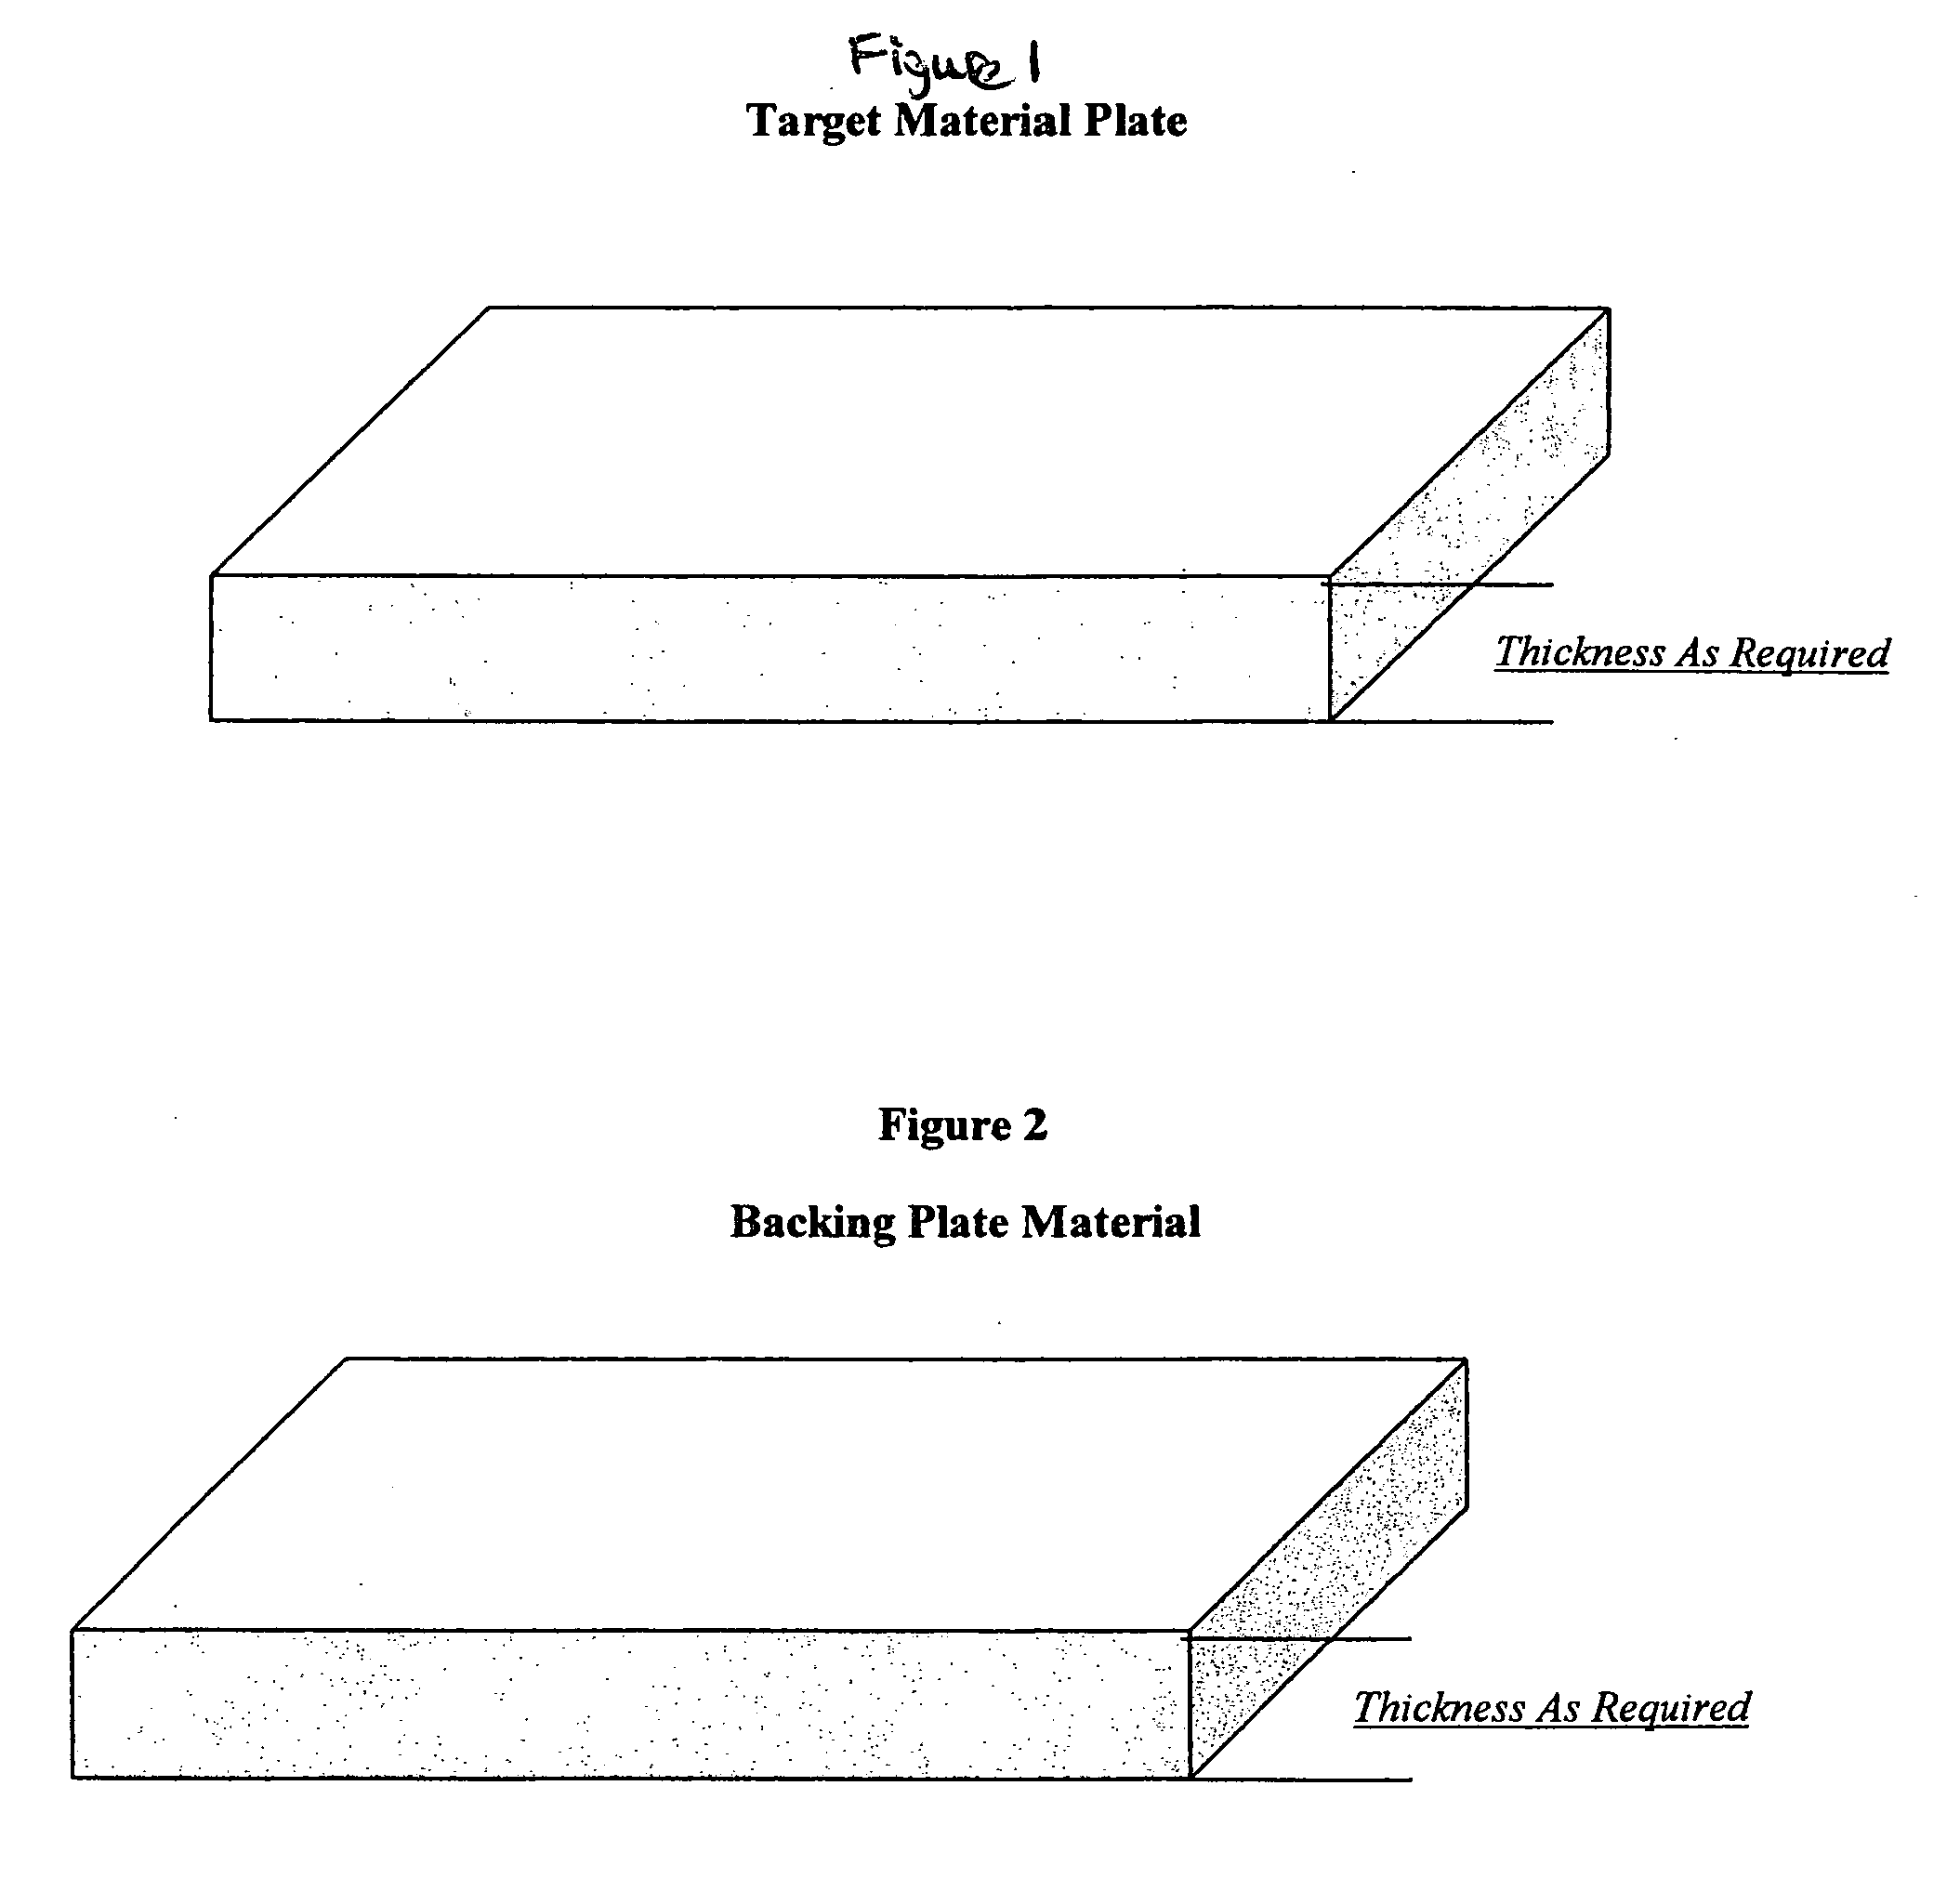 Method of forming sputtering target assembly and assemblies made therefrom